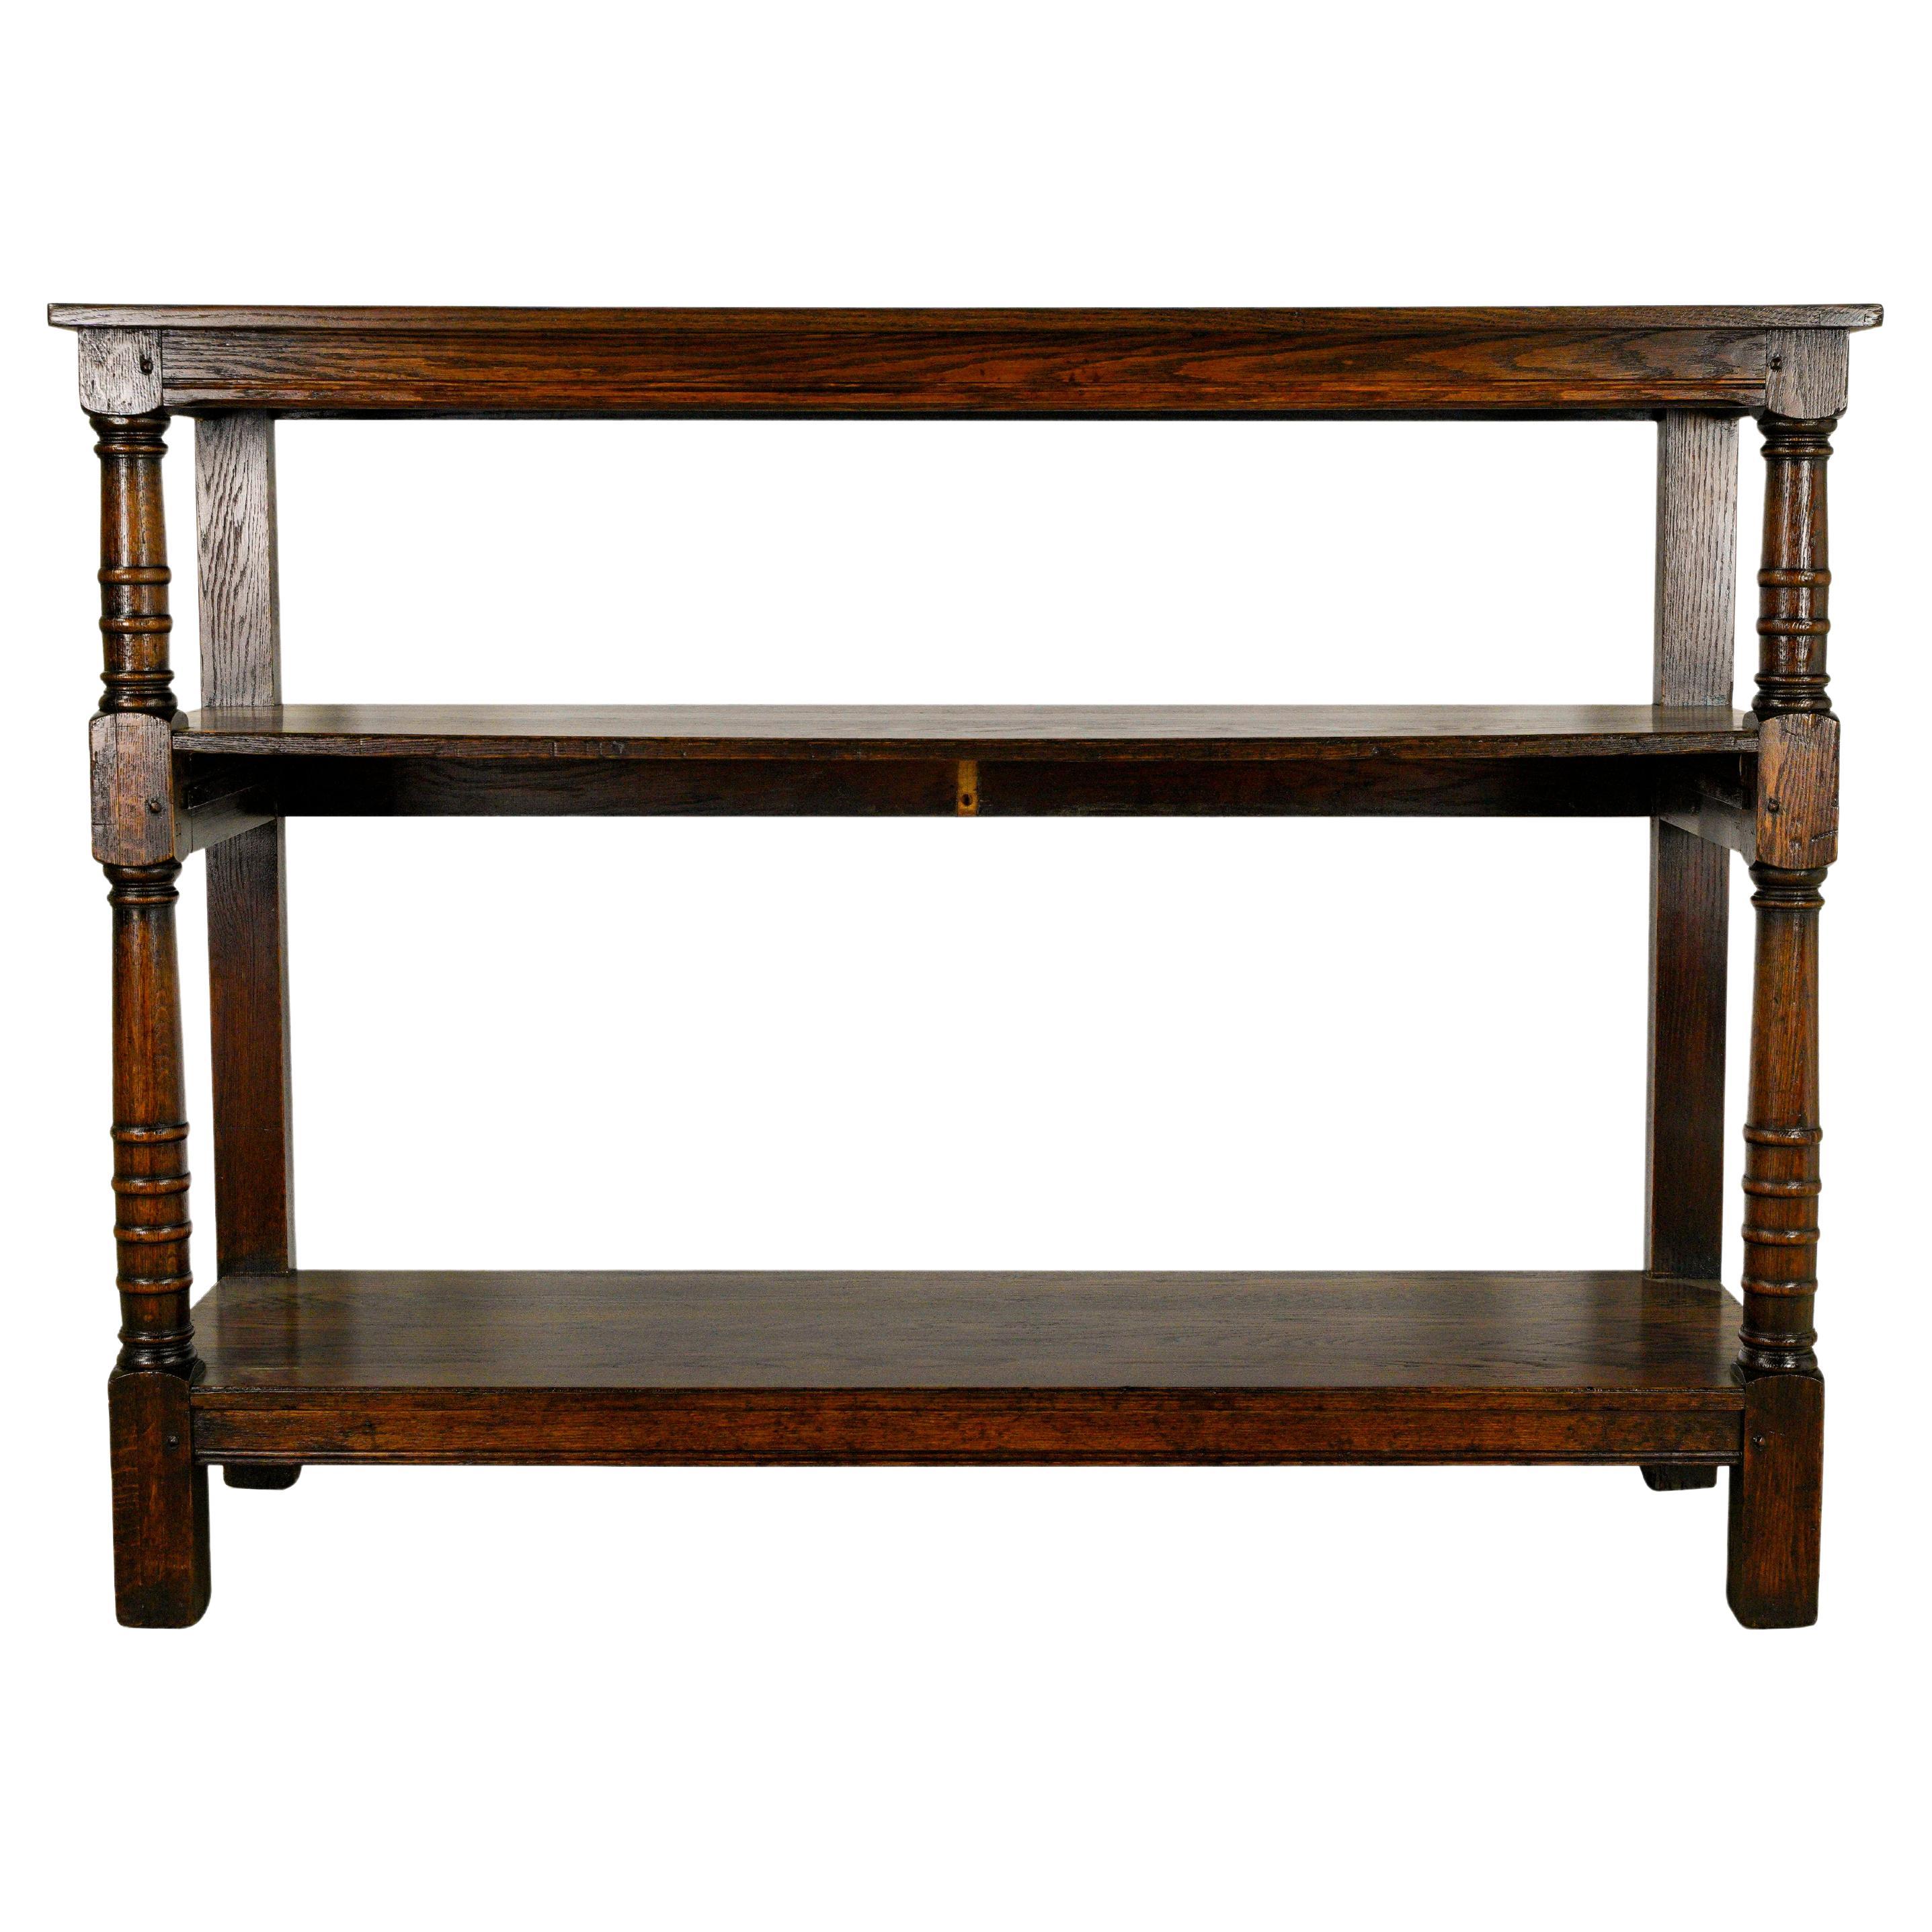 3 Tier Oak Shelf Unit from Union Theological Seminary in Manhattan For Sale